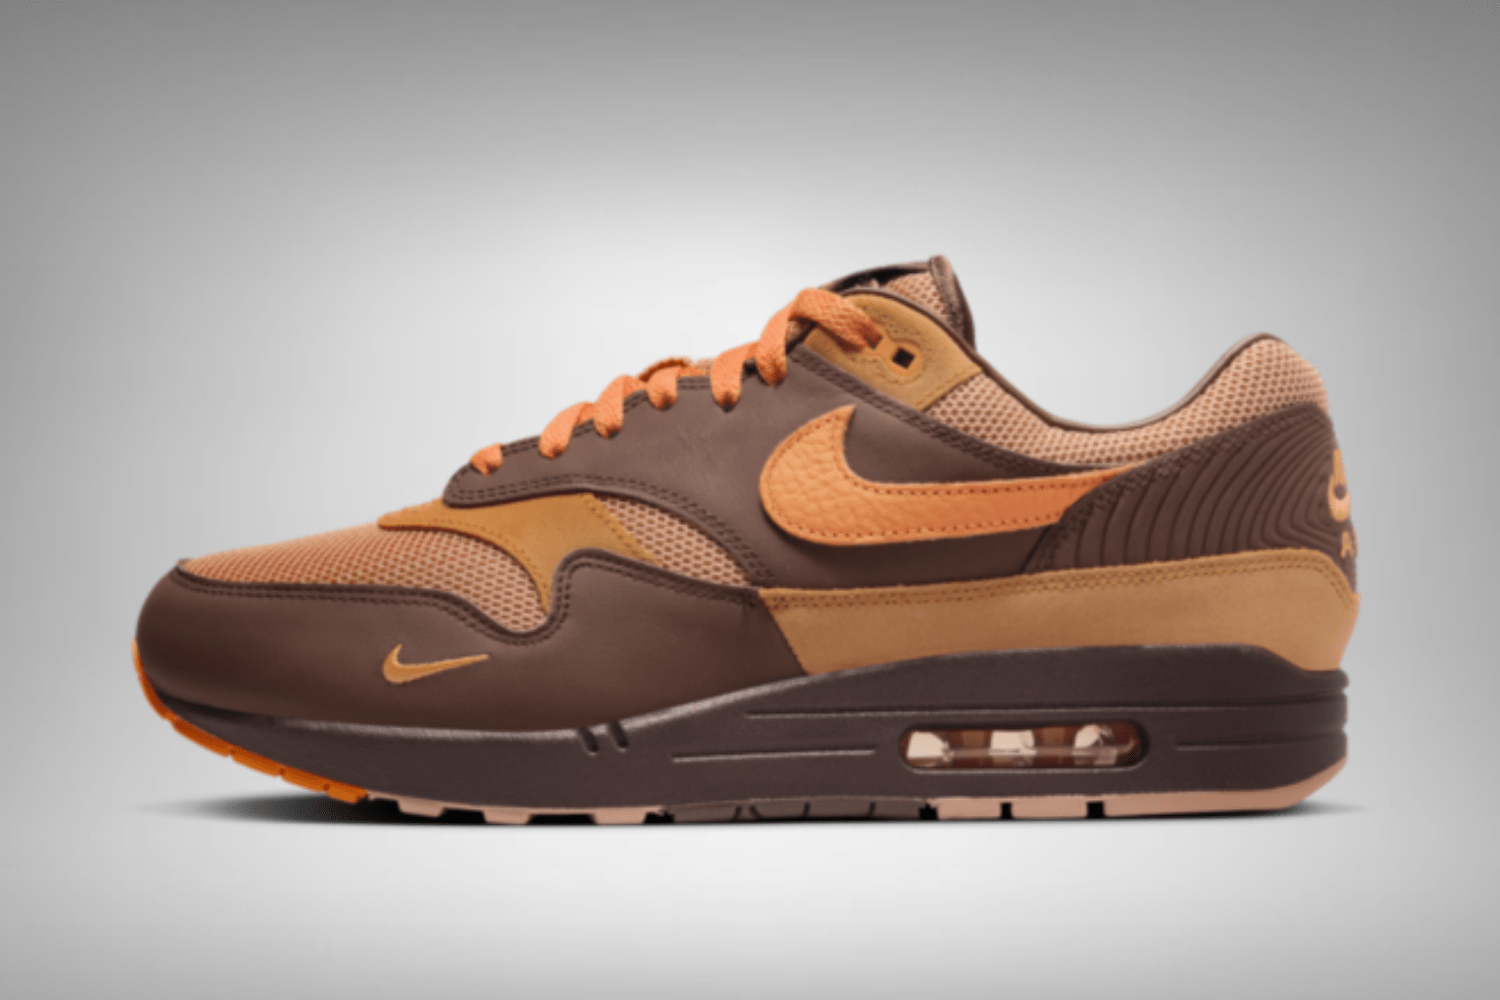 Official images of the Nike Air Max 1 'King's Day' colorway